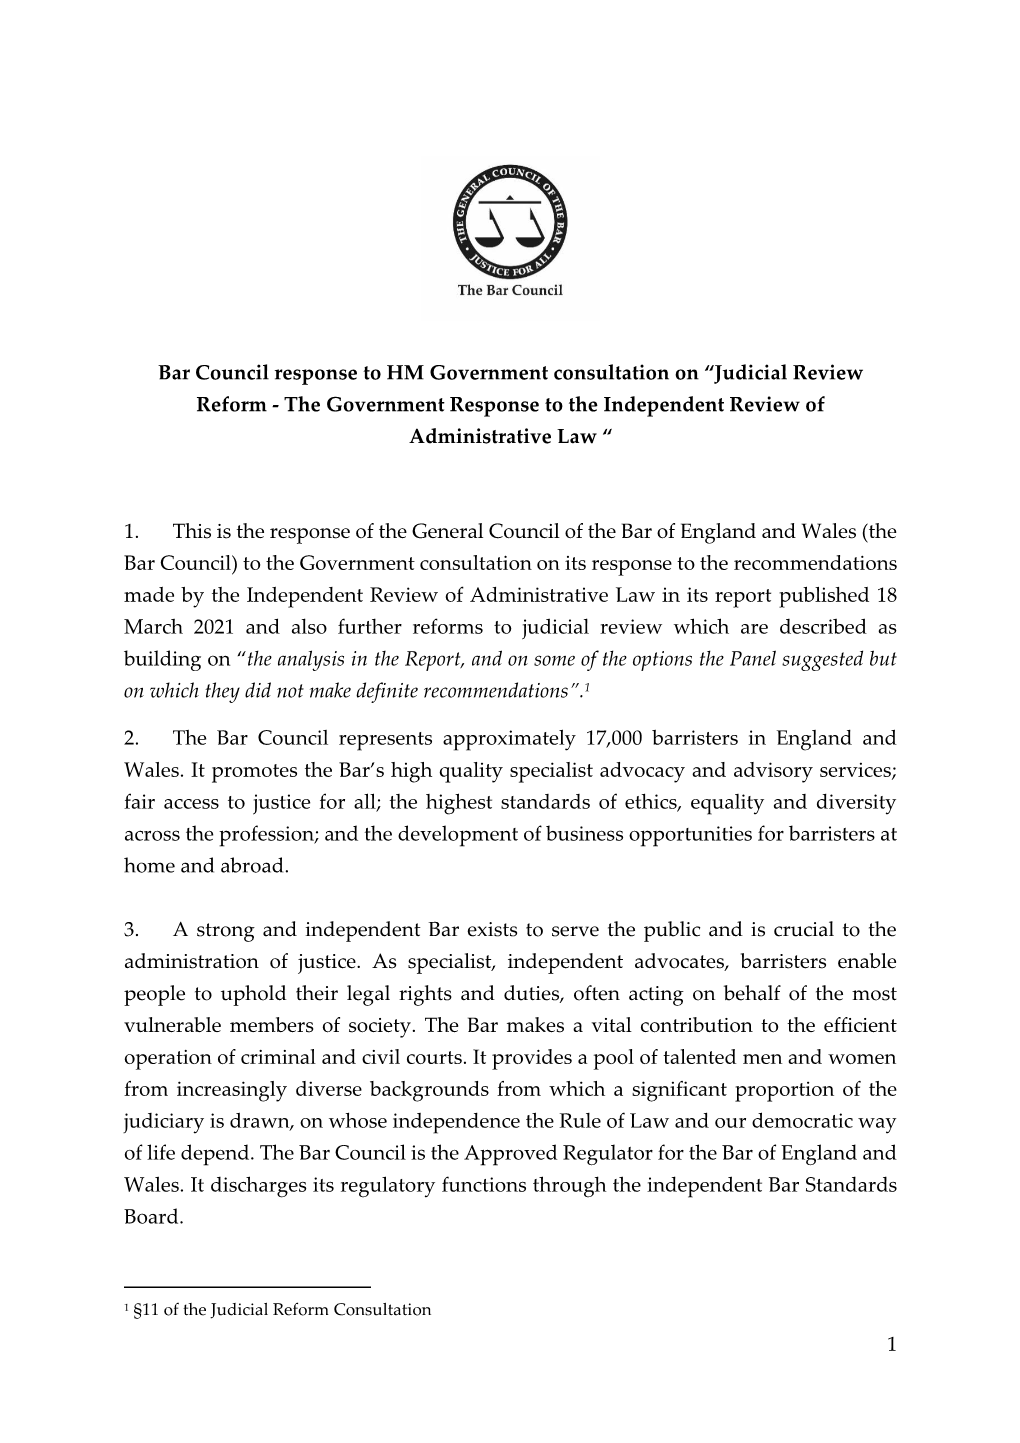 Judicial Review Reform - the Government Response to the Independent Review of Administrative Law “